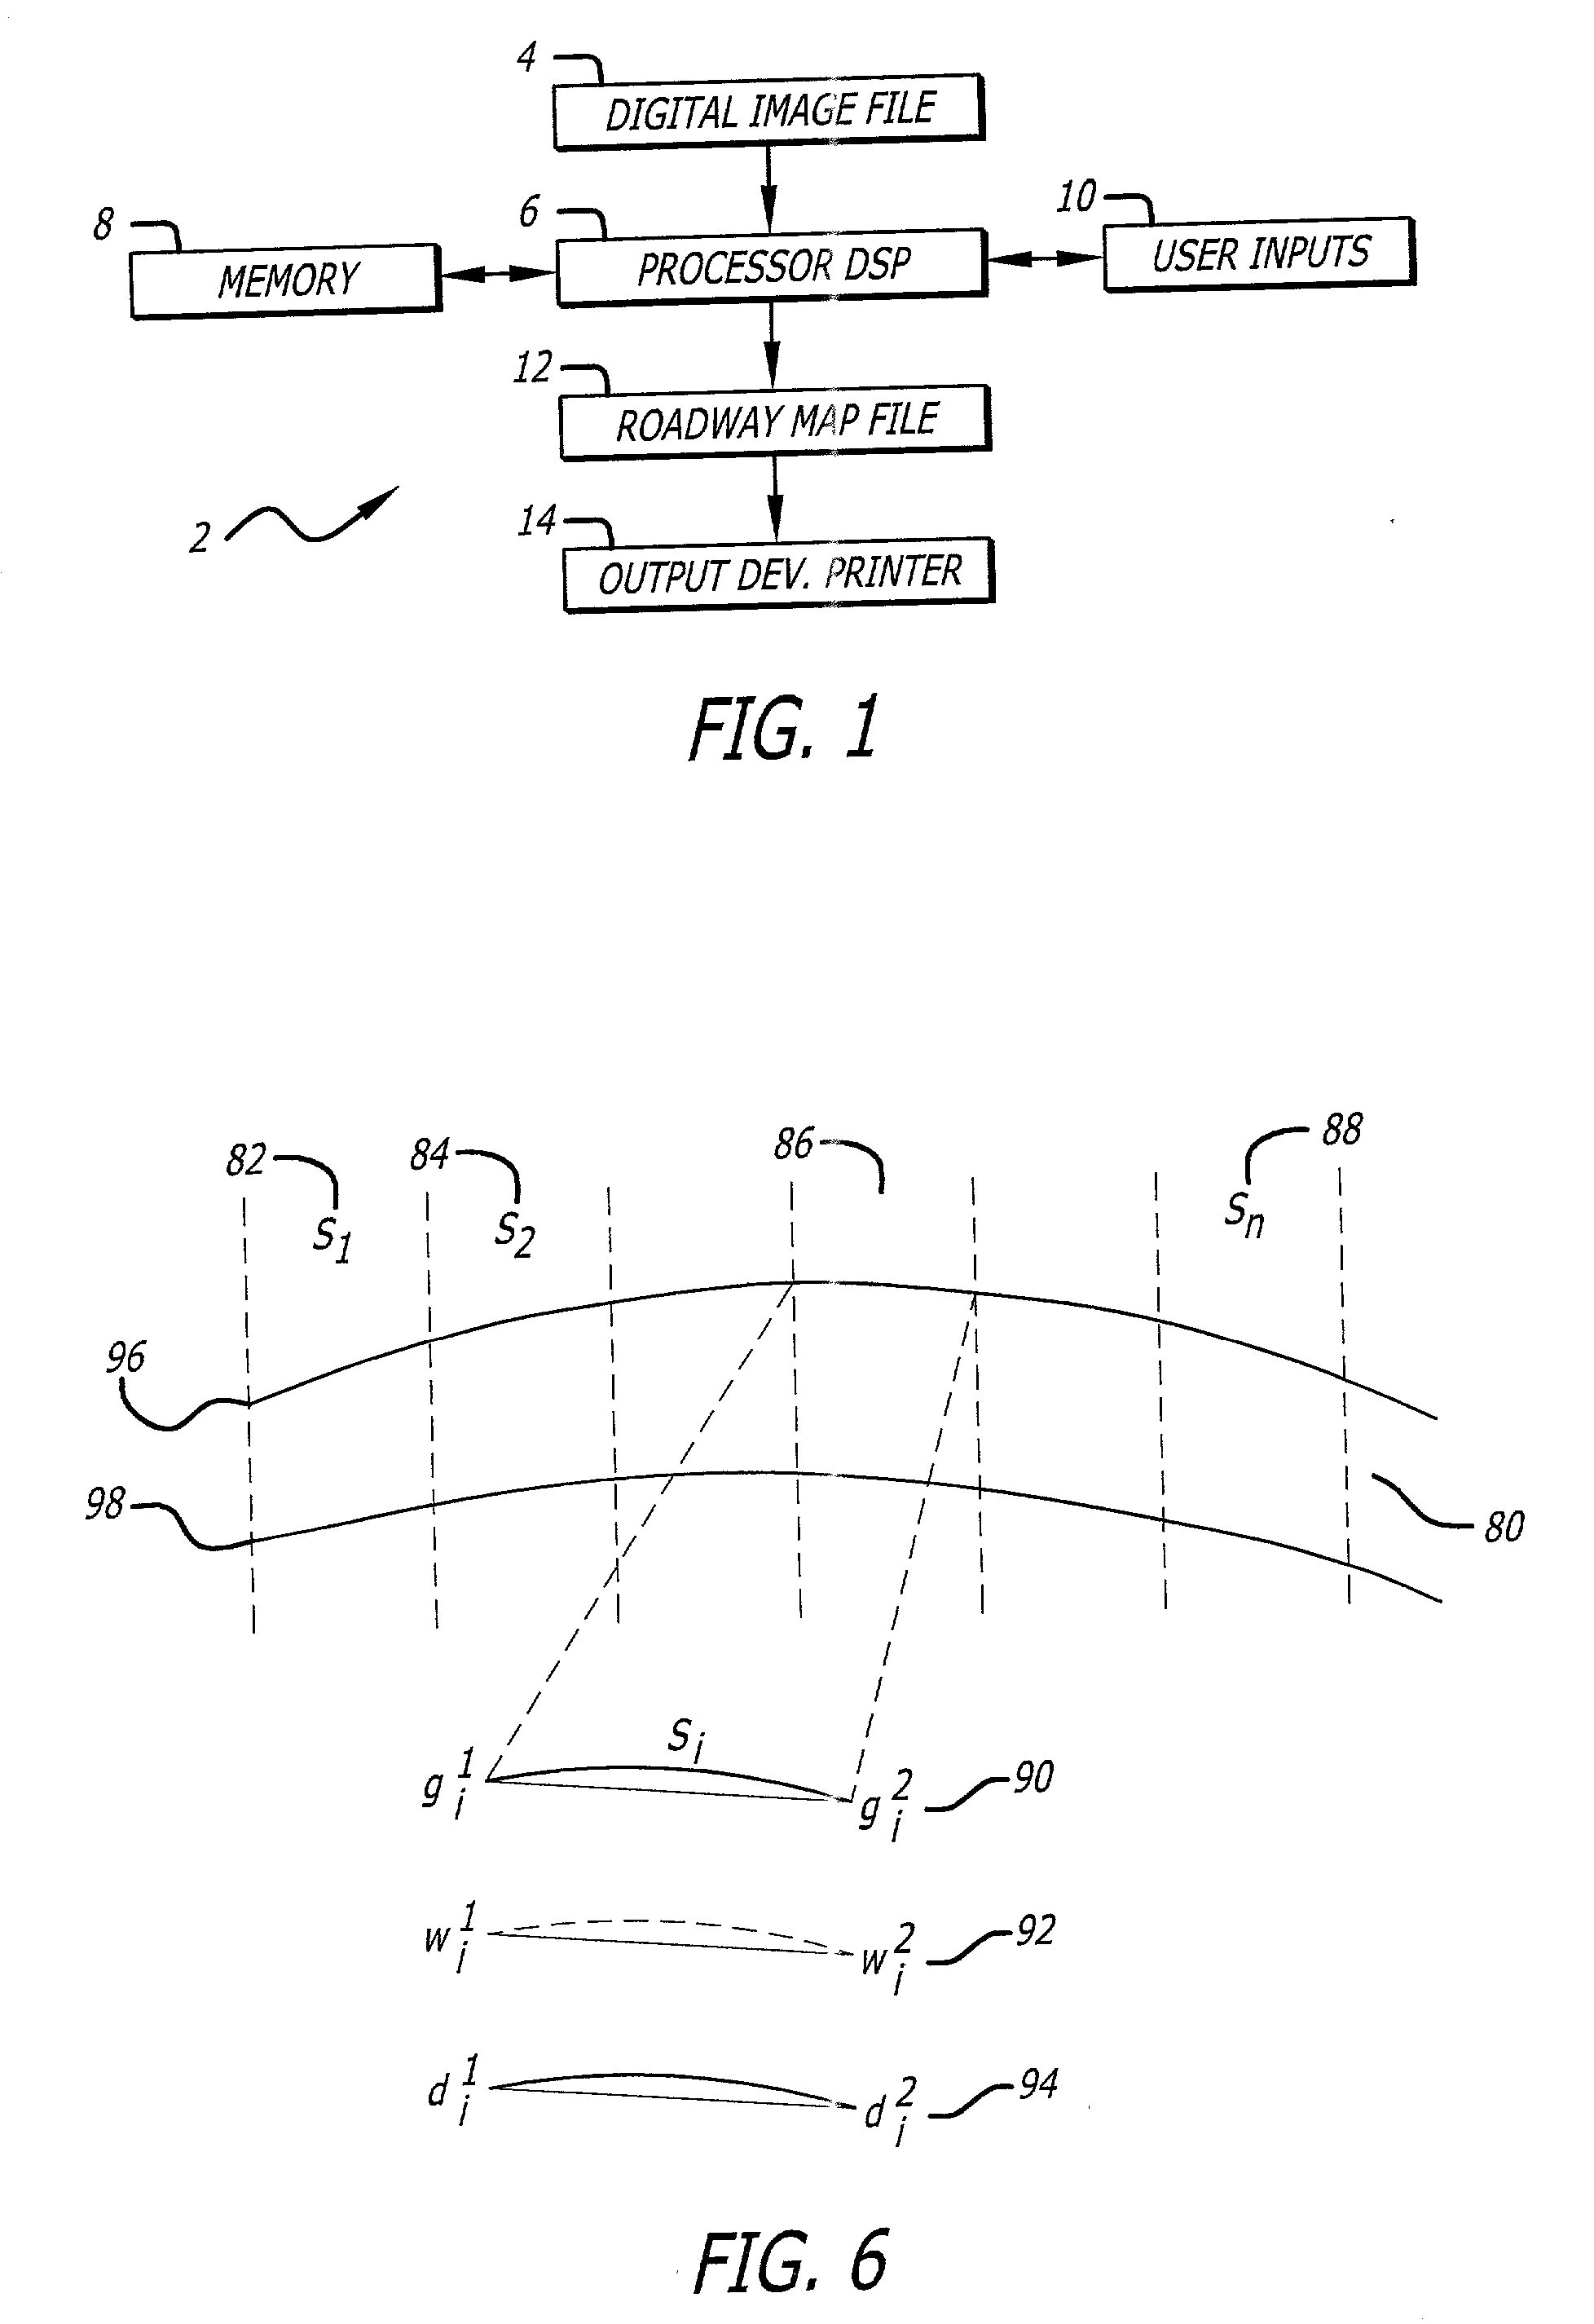 Digital image edge detection and road network tracking method and system